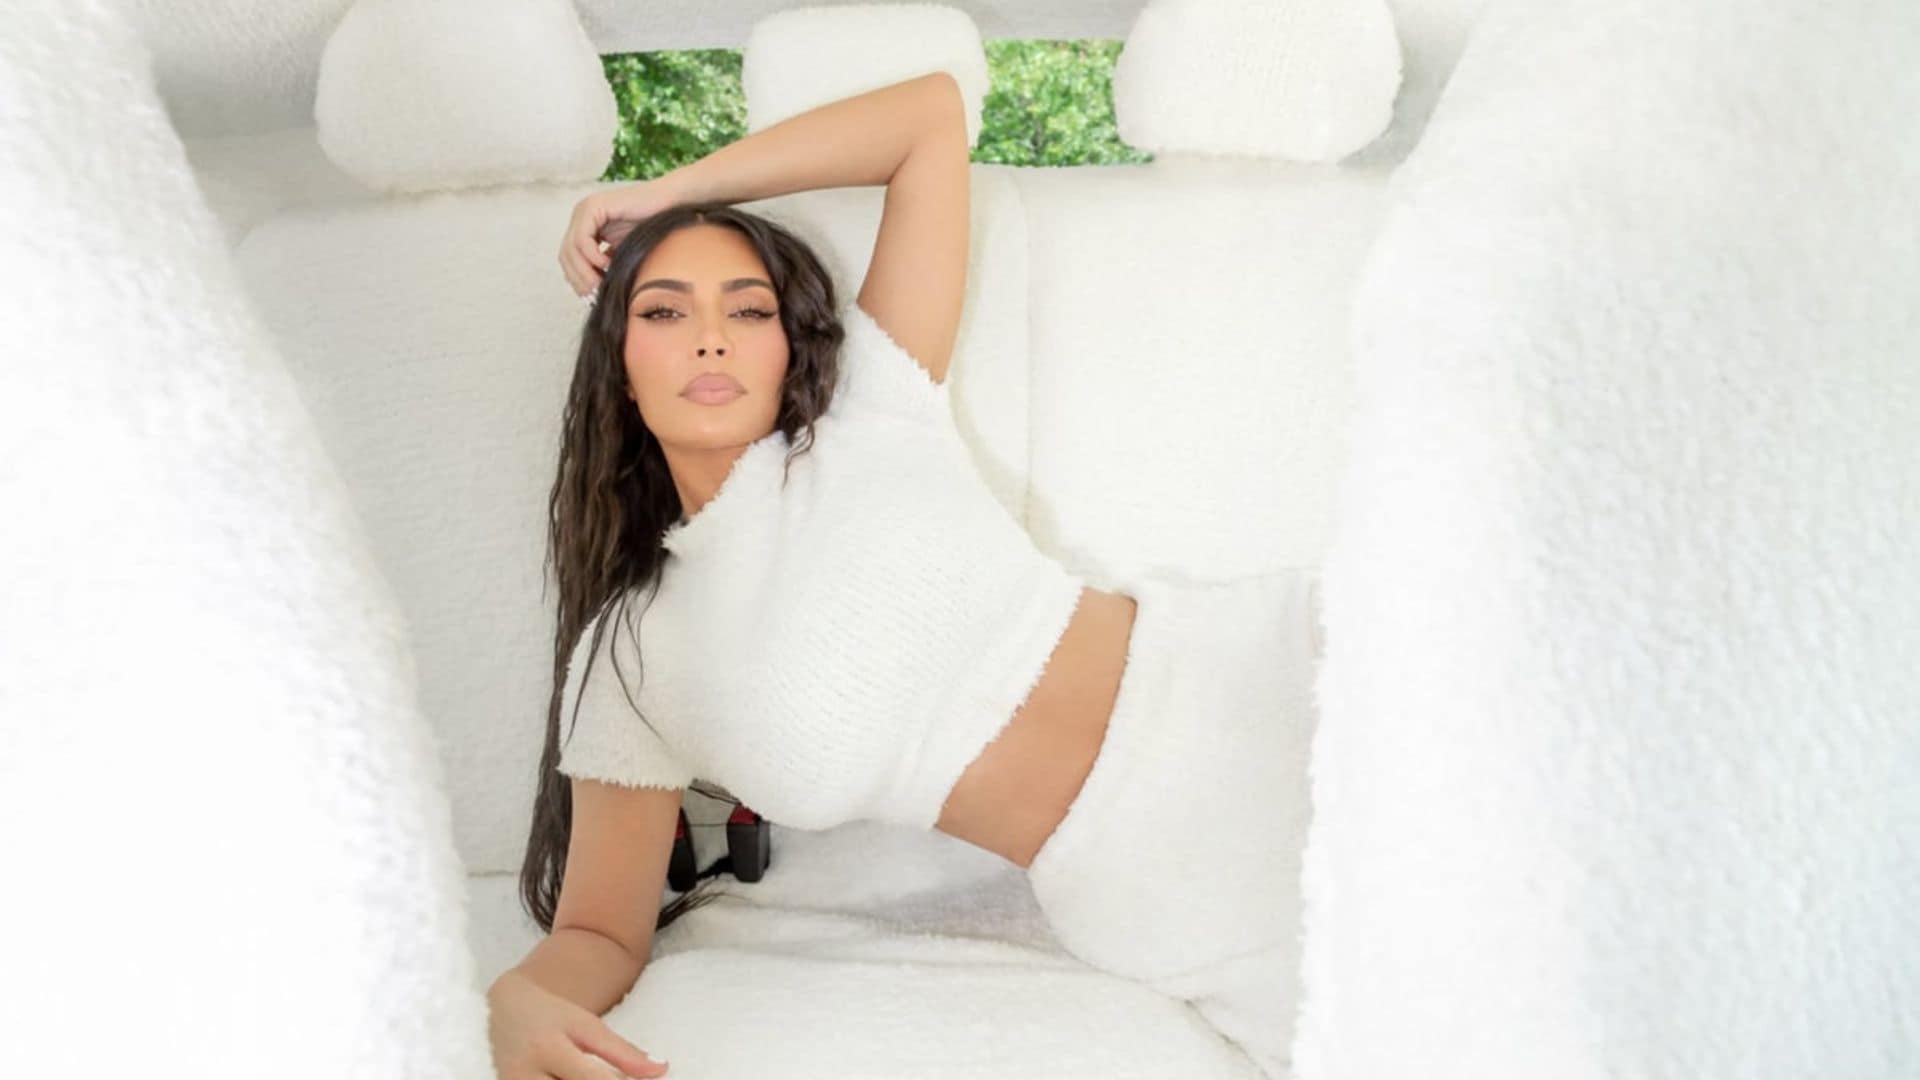 Kim Kardashian’s SKIMS becomes one of the 2022 TIME100 Most Influential companies